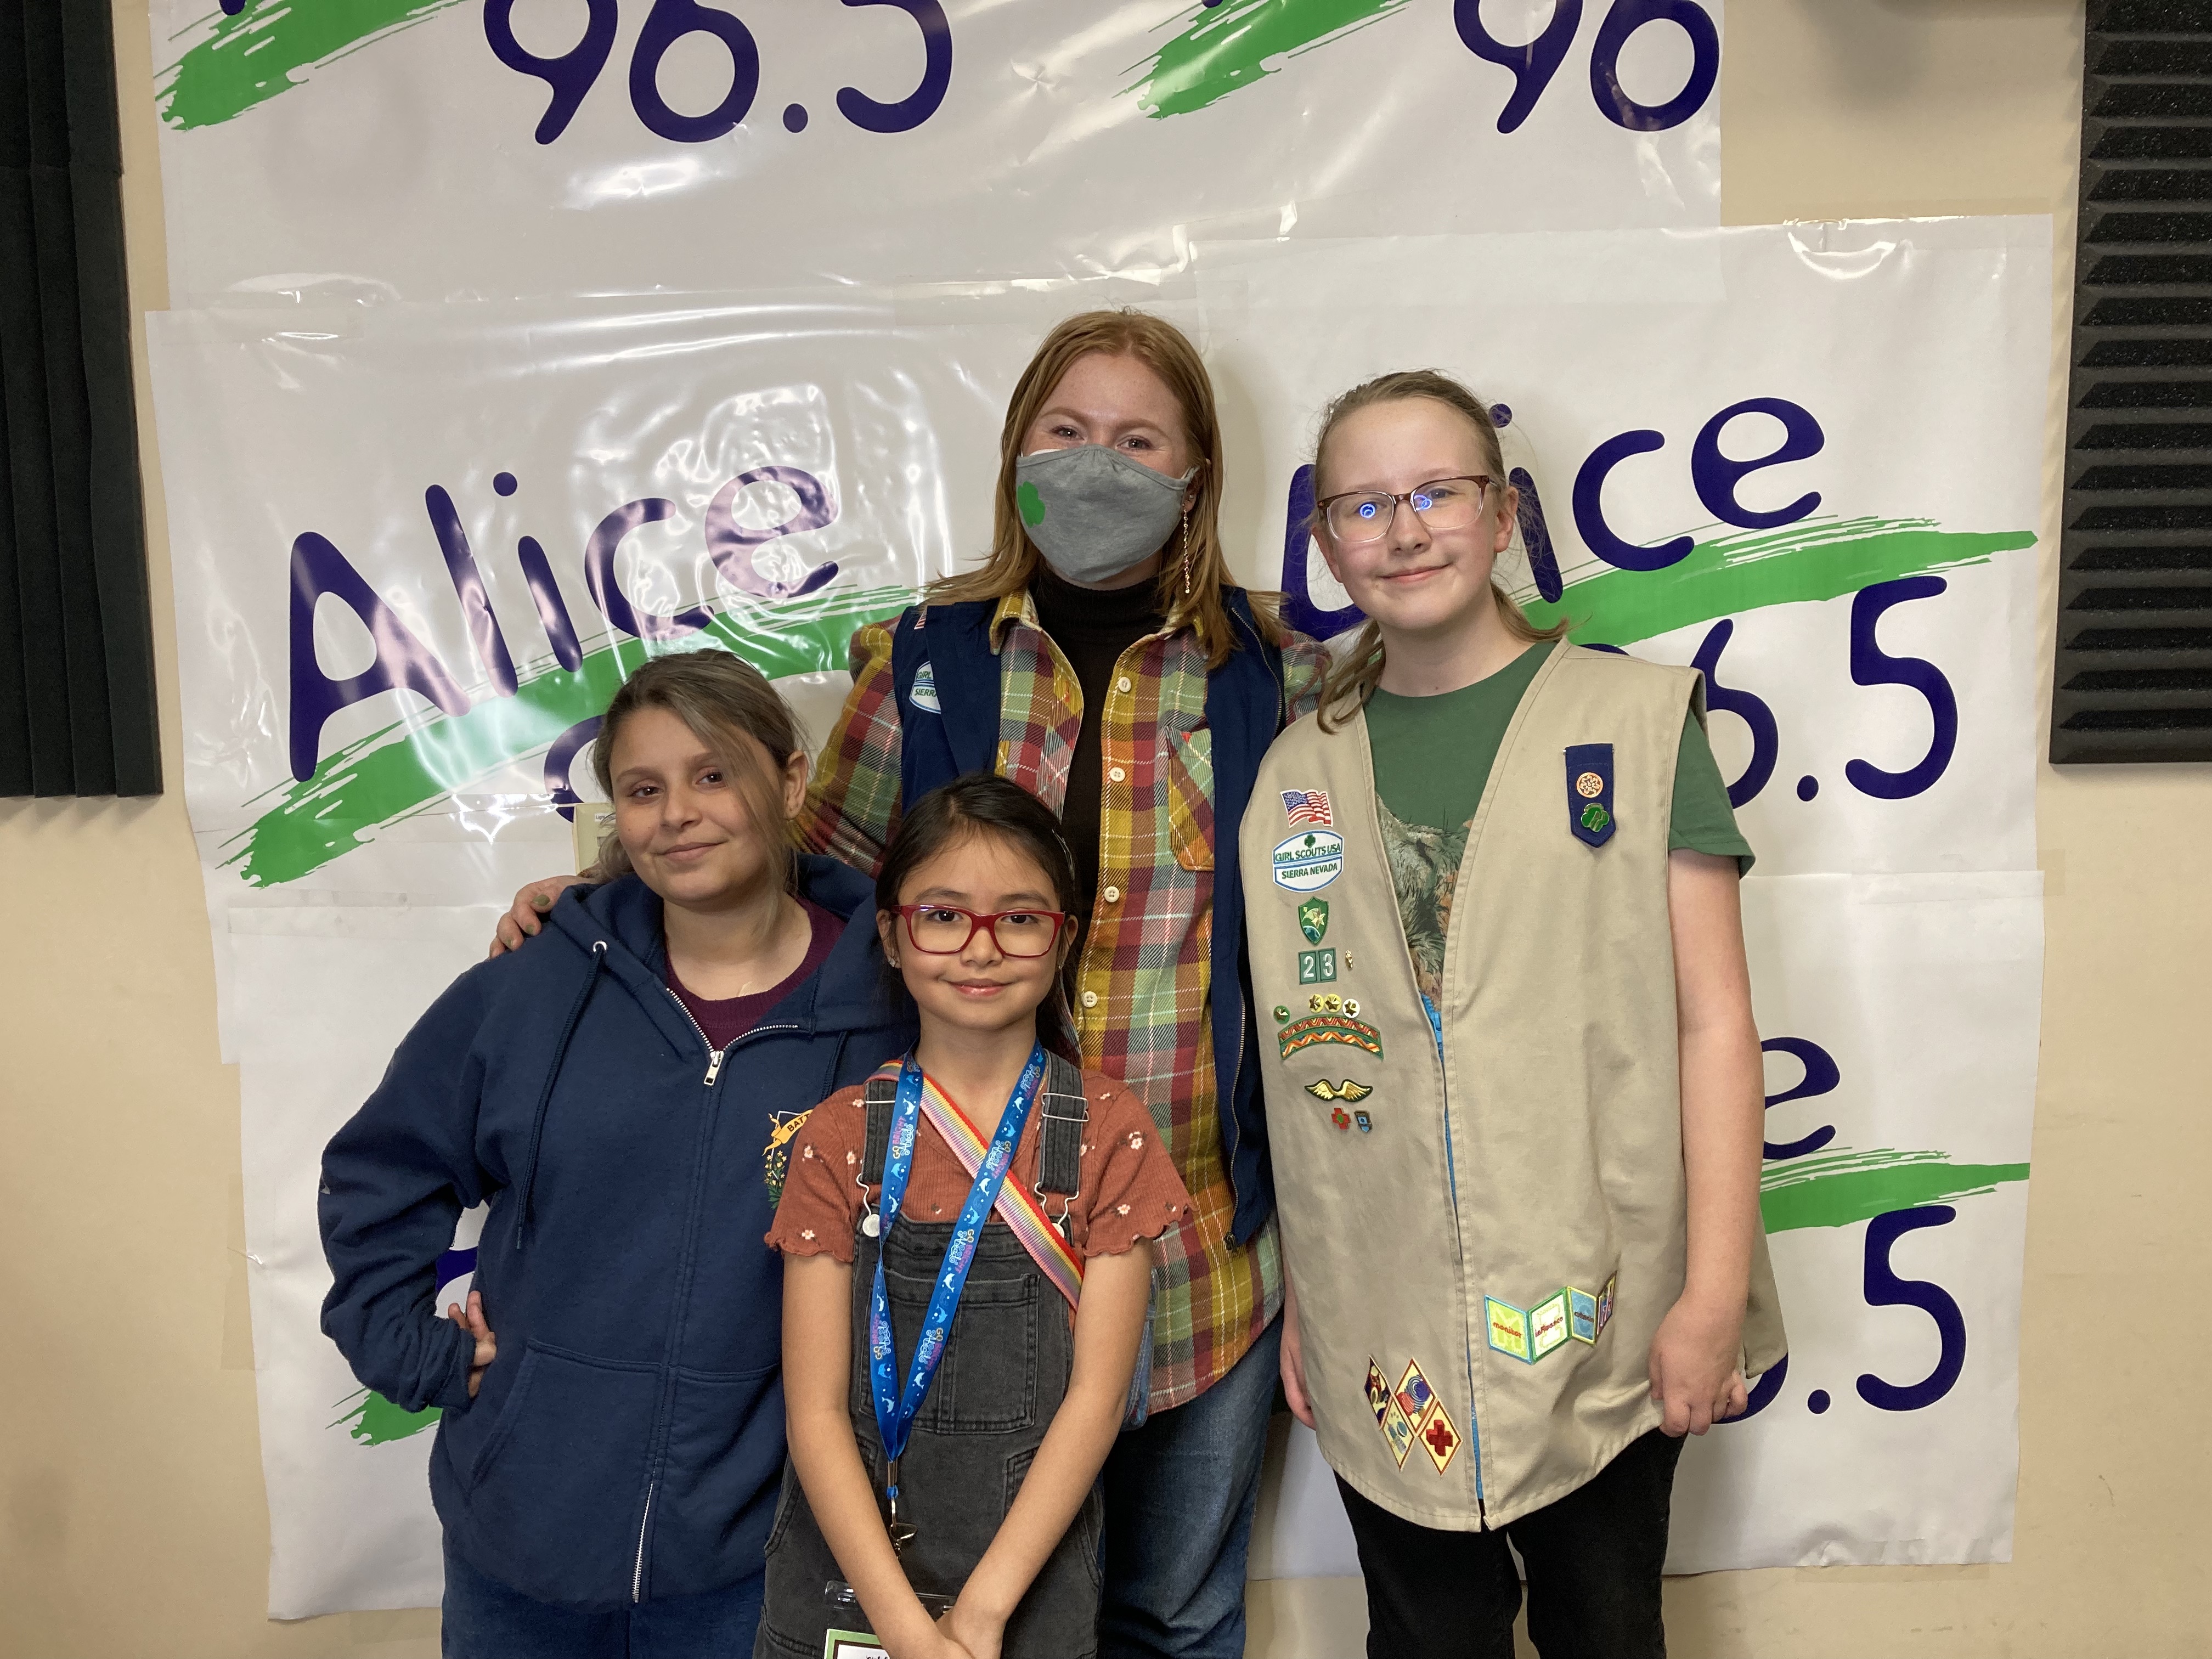 Audrey and 3 girl scouts stand in front of the Alice Radio sign 